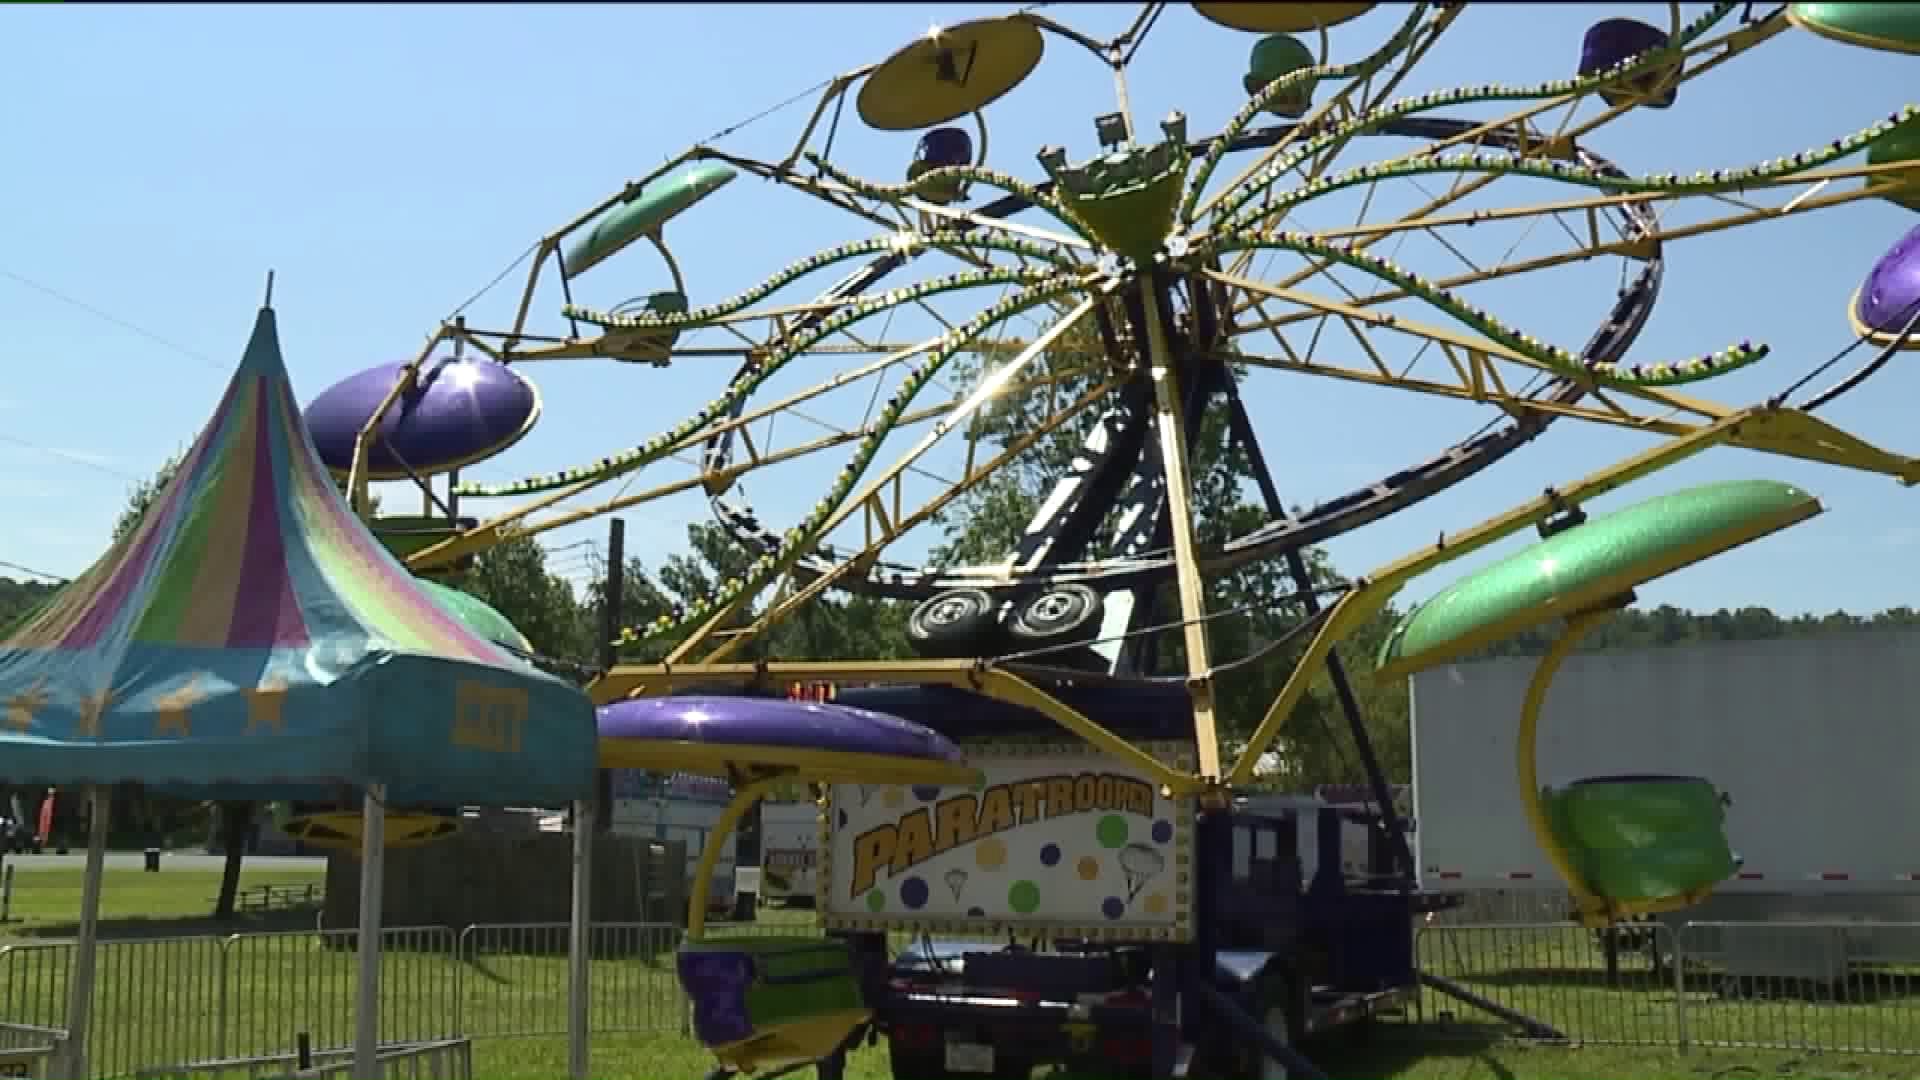 Concern about Safety as Schuylkill County Fair Gets Underway